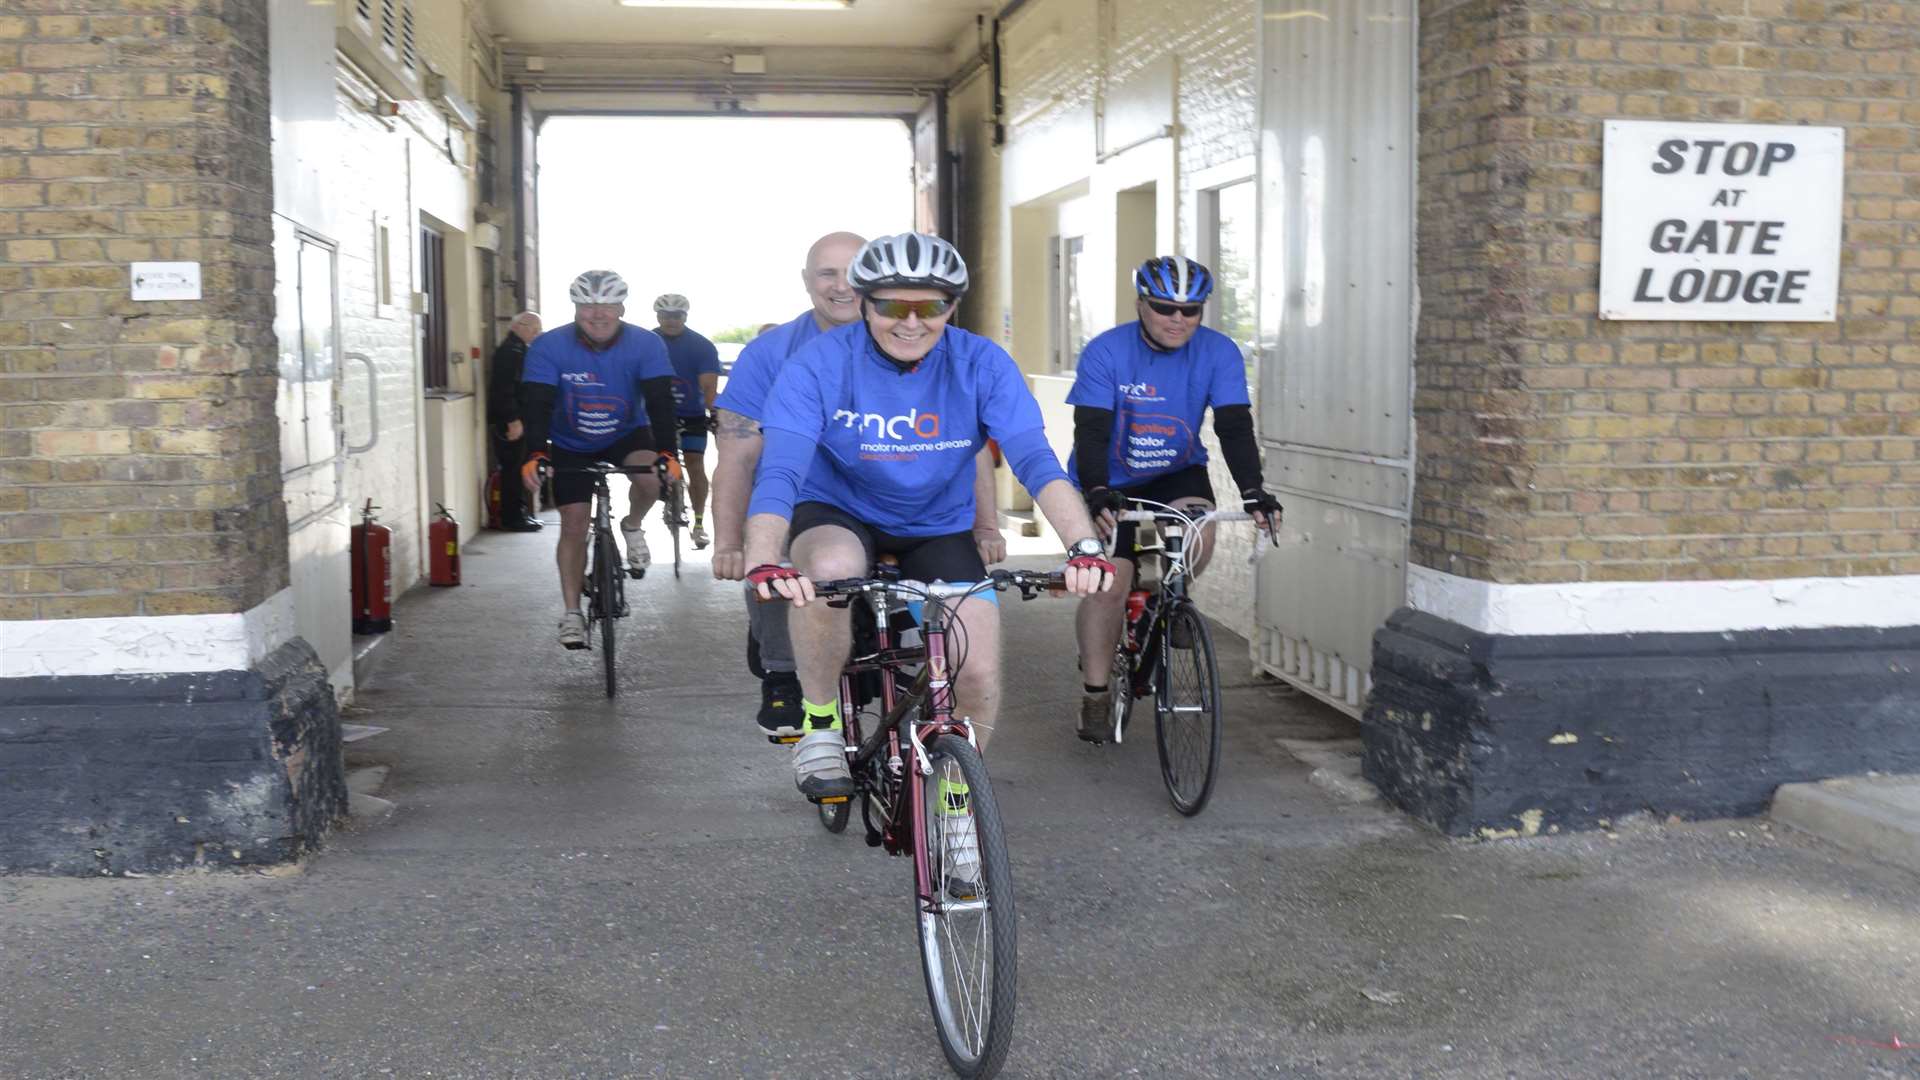 The cyclists return through the old gatehouse at Rochester Prison